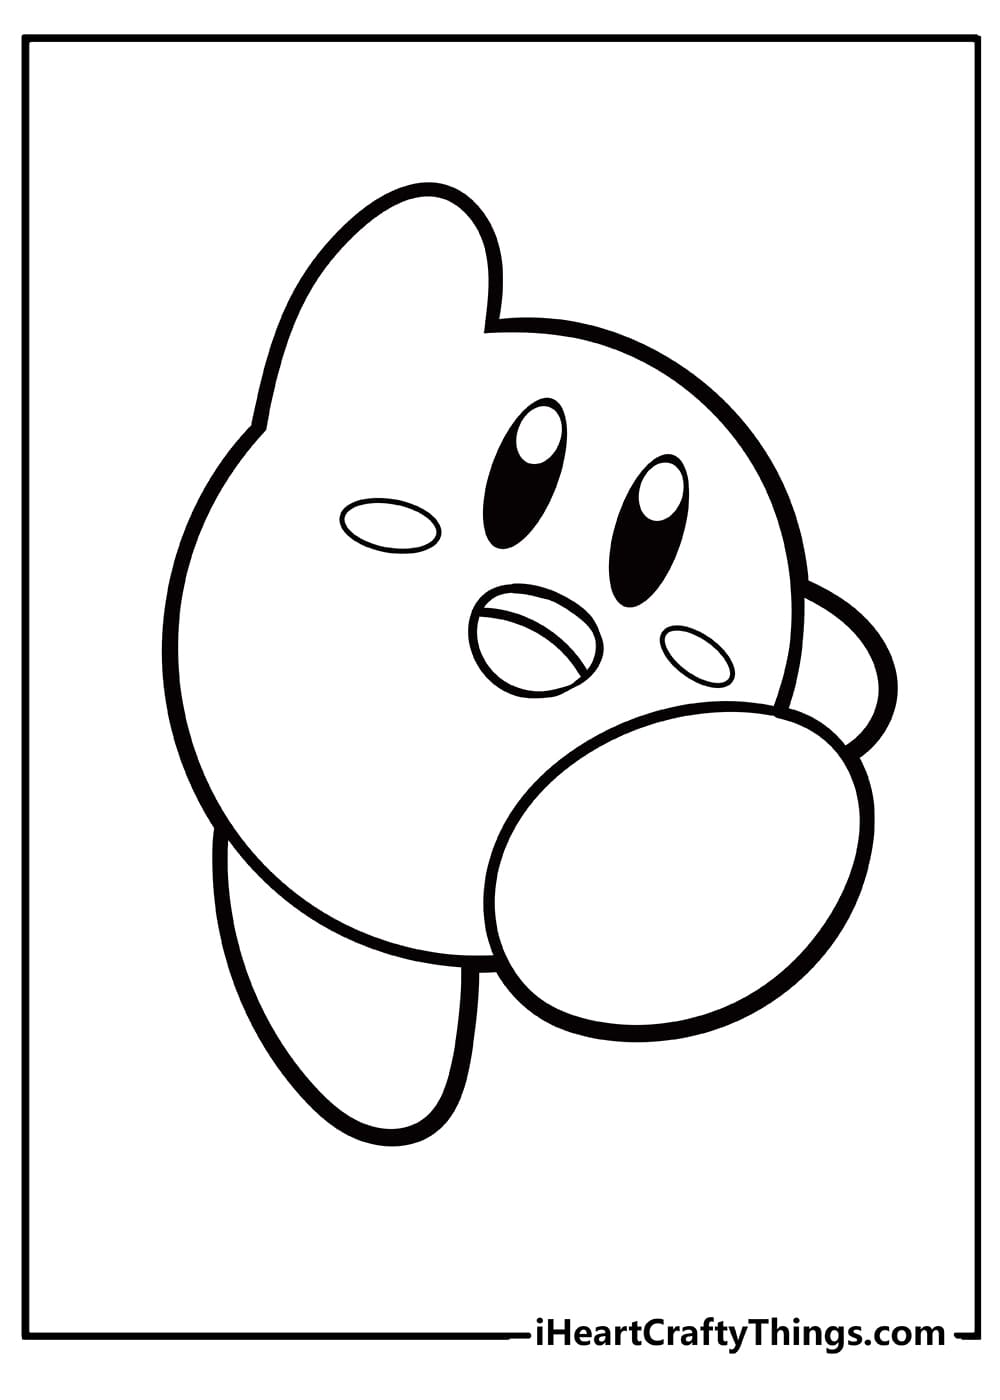 Kirby Image For Kids